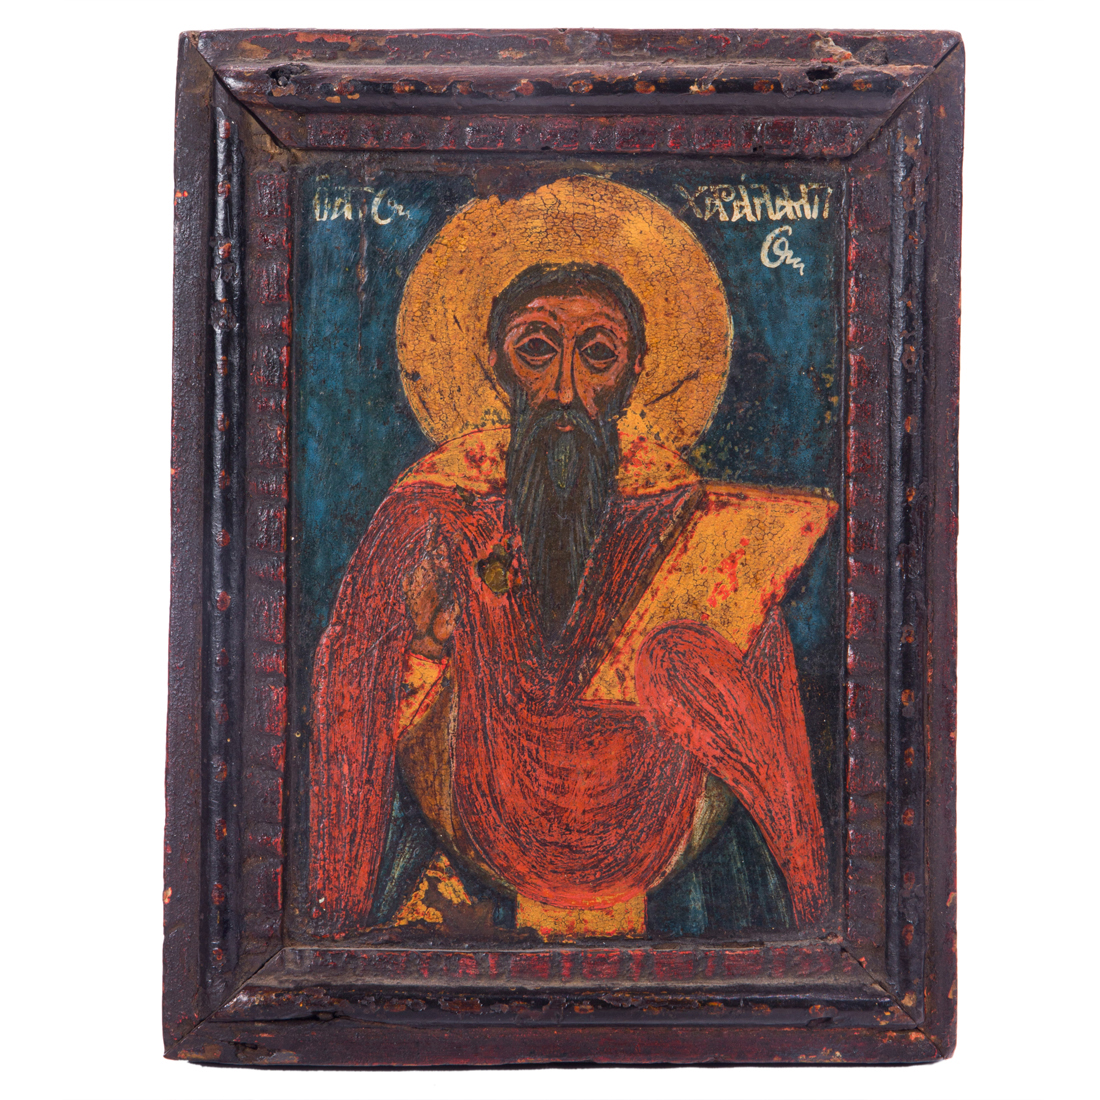 BZYANTINE STYLE ICON OF GREGORIUS 3a1e7a